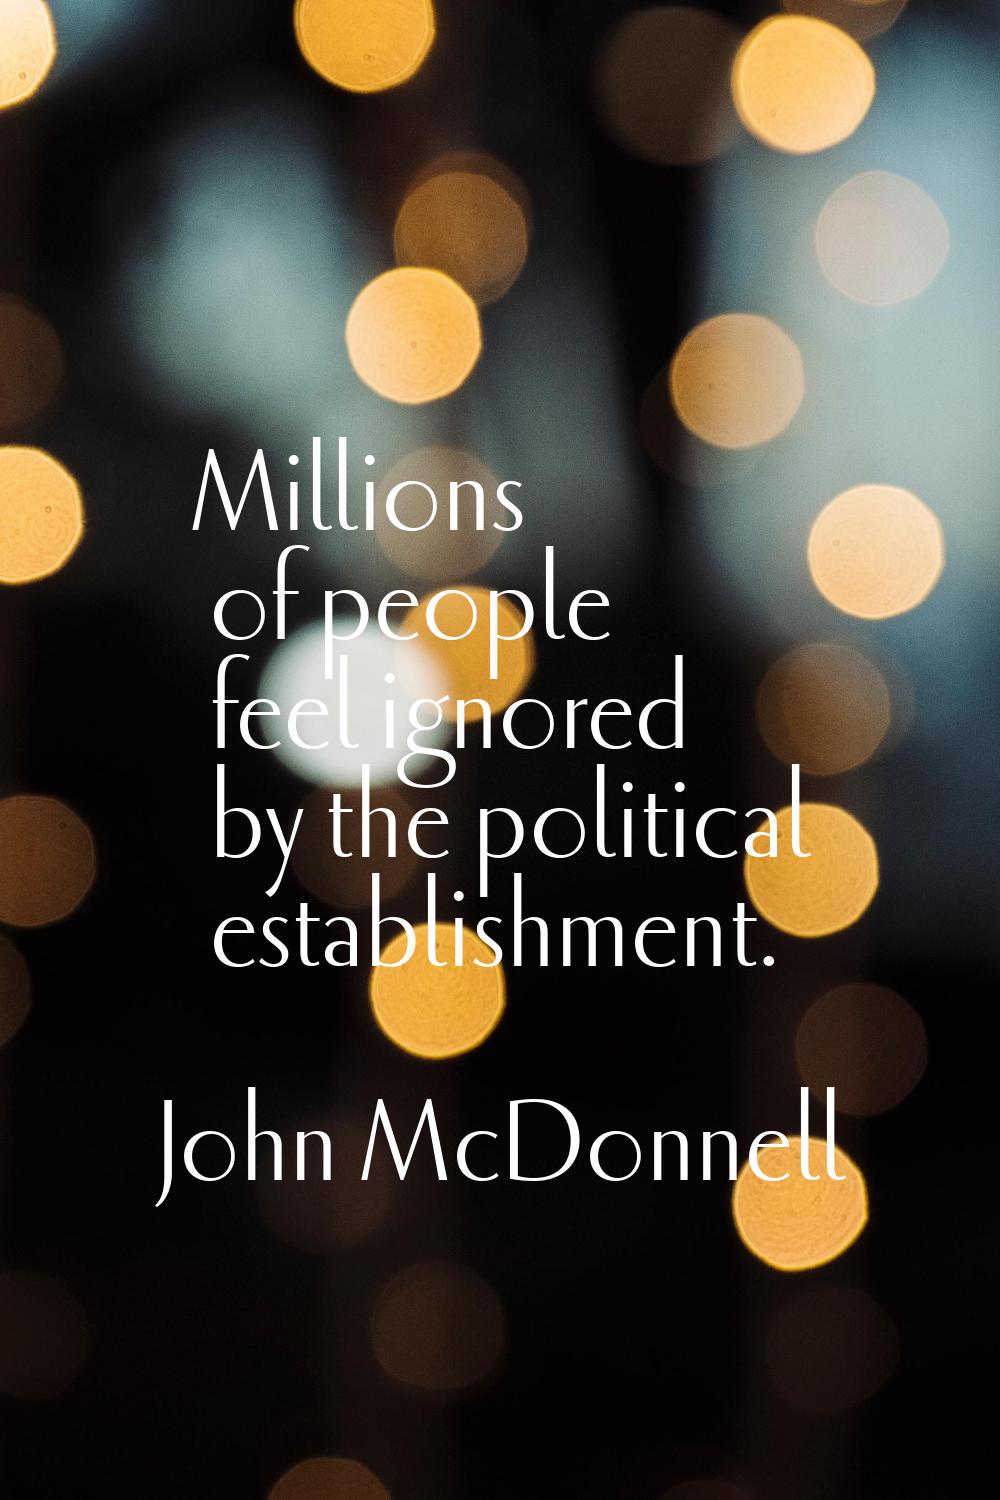 Millions of people feel ignored by the political establishment.